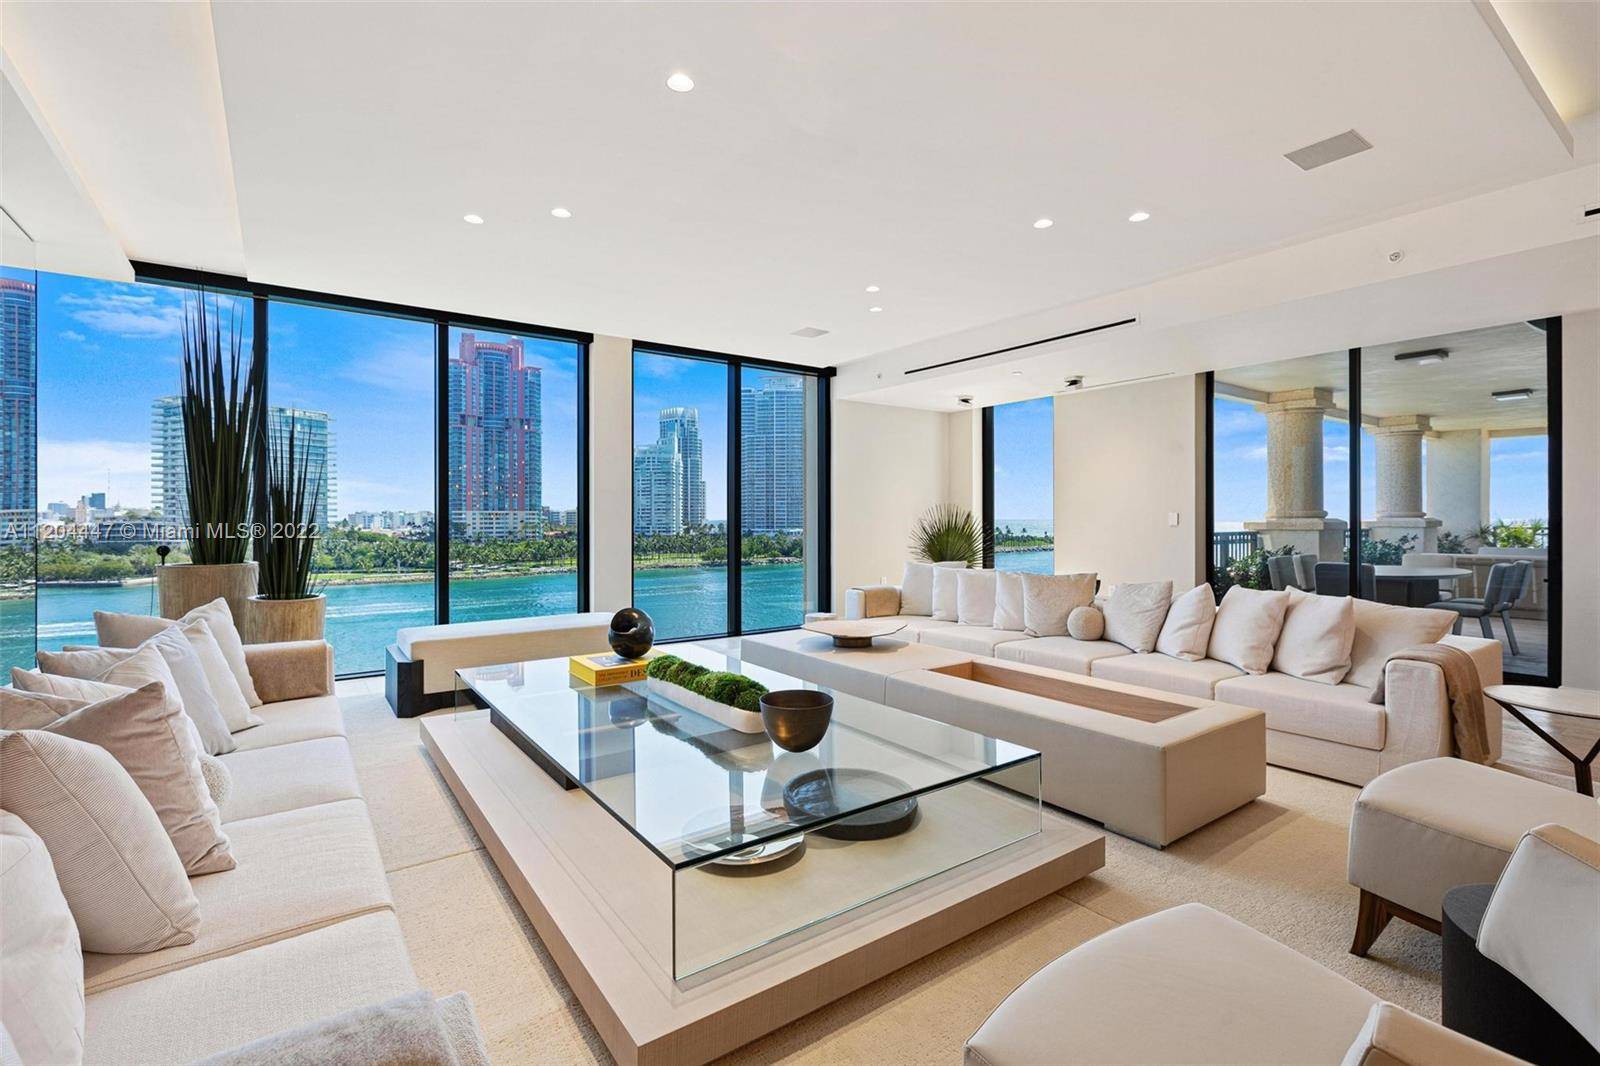 BESPOKE RESIDENCE DESIGNED BY POGGI DESIGN IN NEUTRAL TONES OF BEIGE WITH DIRECT BAY VIEWS AT THE AWARD WINNING PALAZZO DELLA LUNA ON FISHER ISLAND !